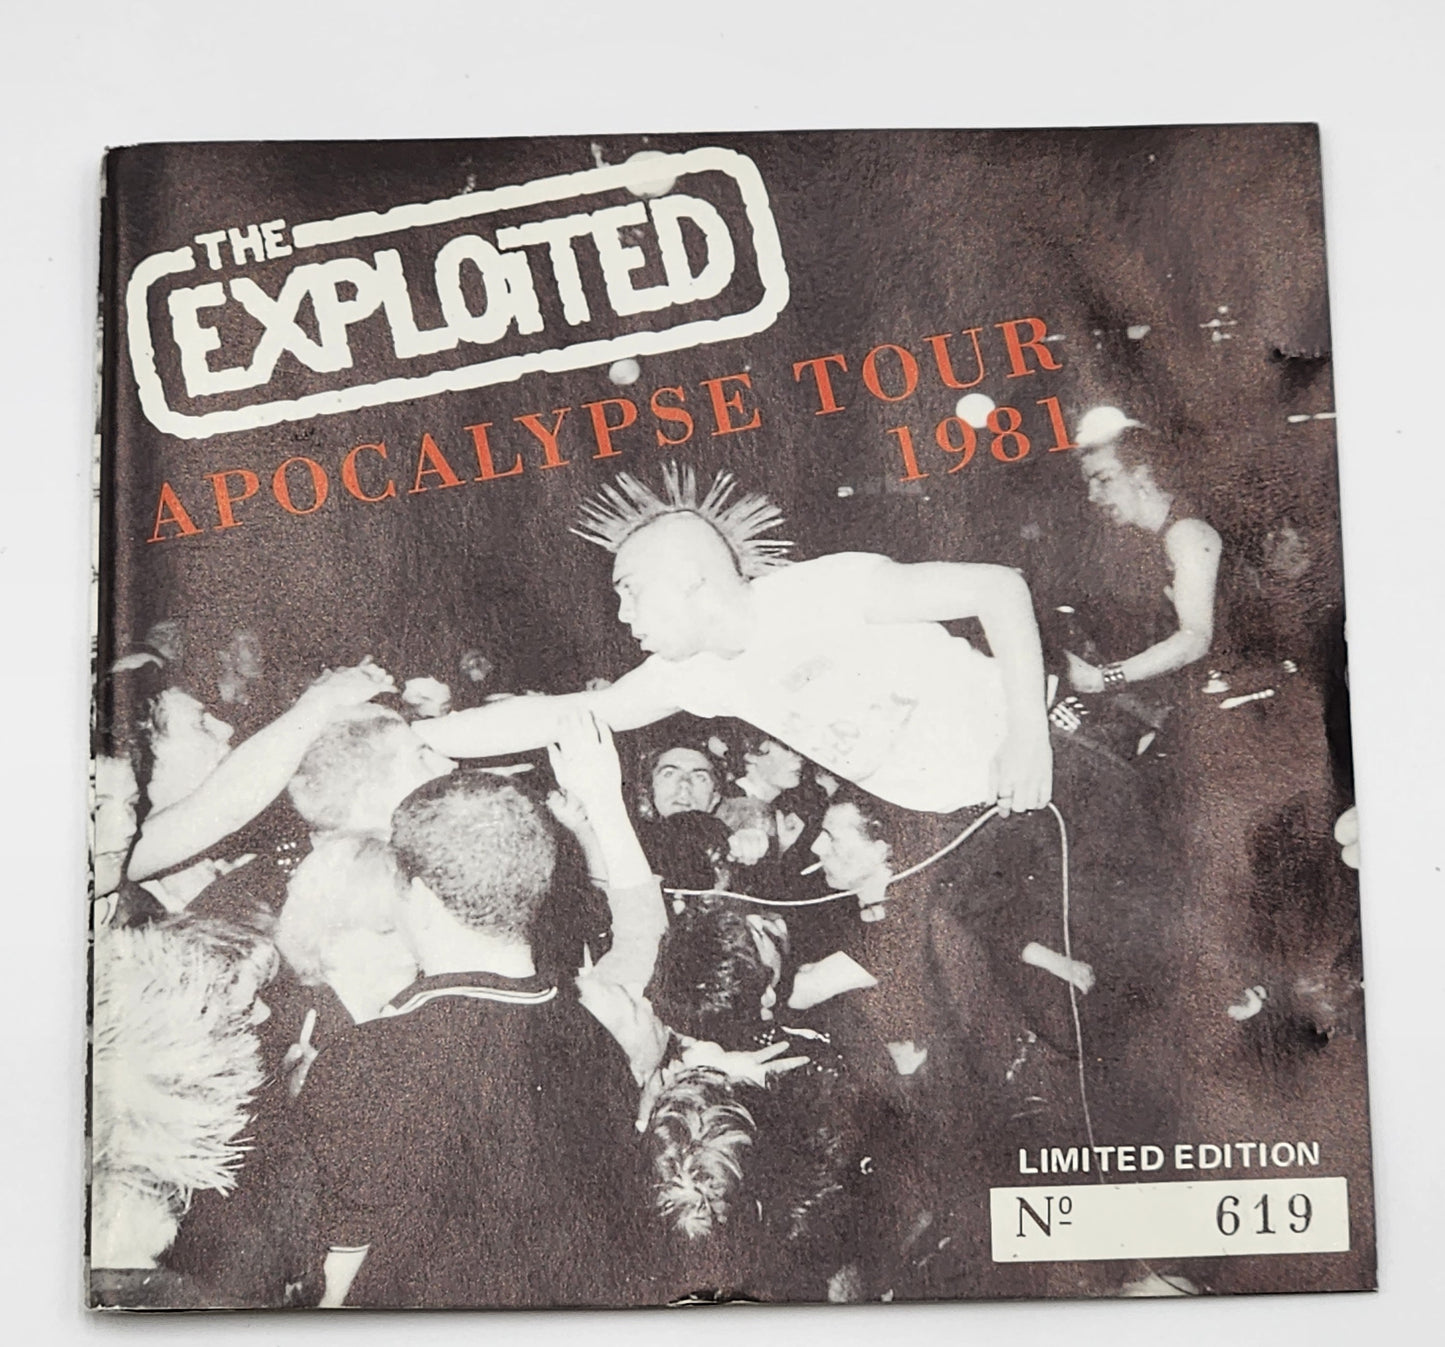 The Exploited "Apocalypse Tour 1981" Limited Ed & Numbered Punk CD